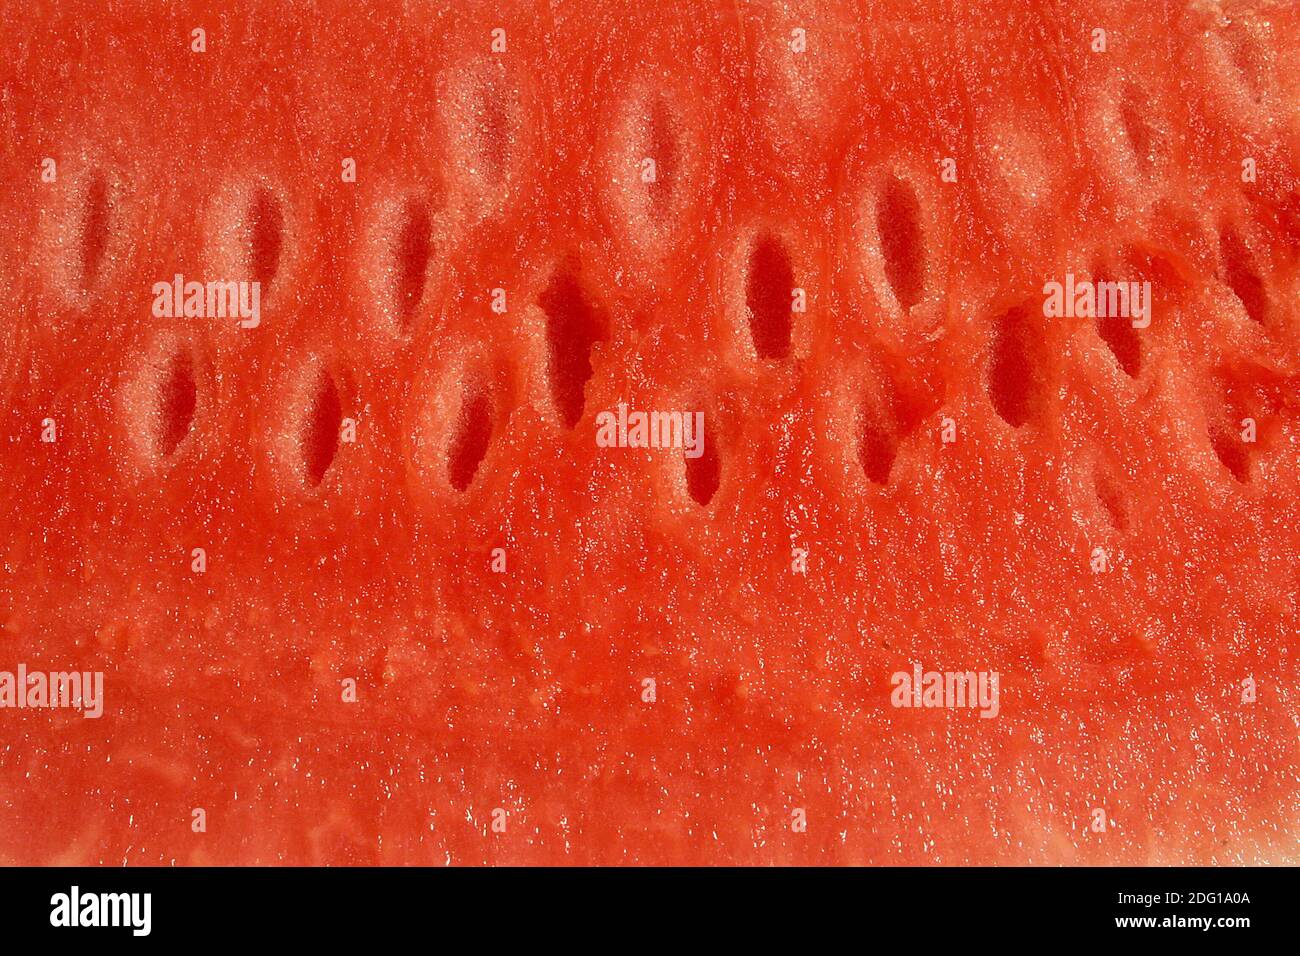 Close up of watermelon Stock Photo